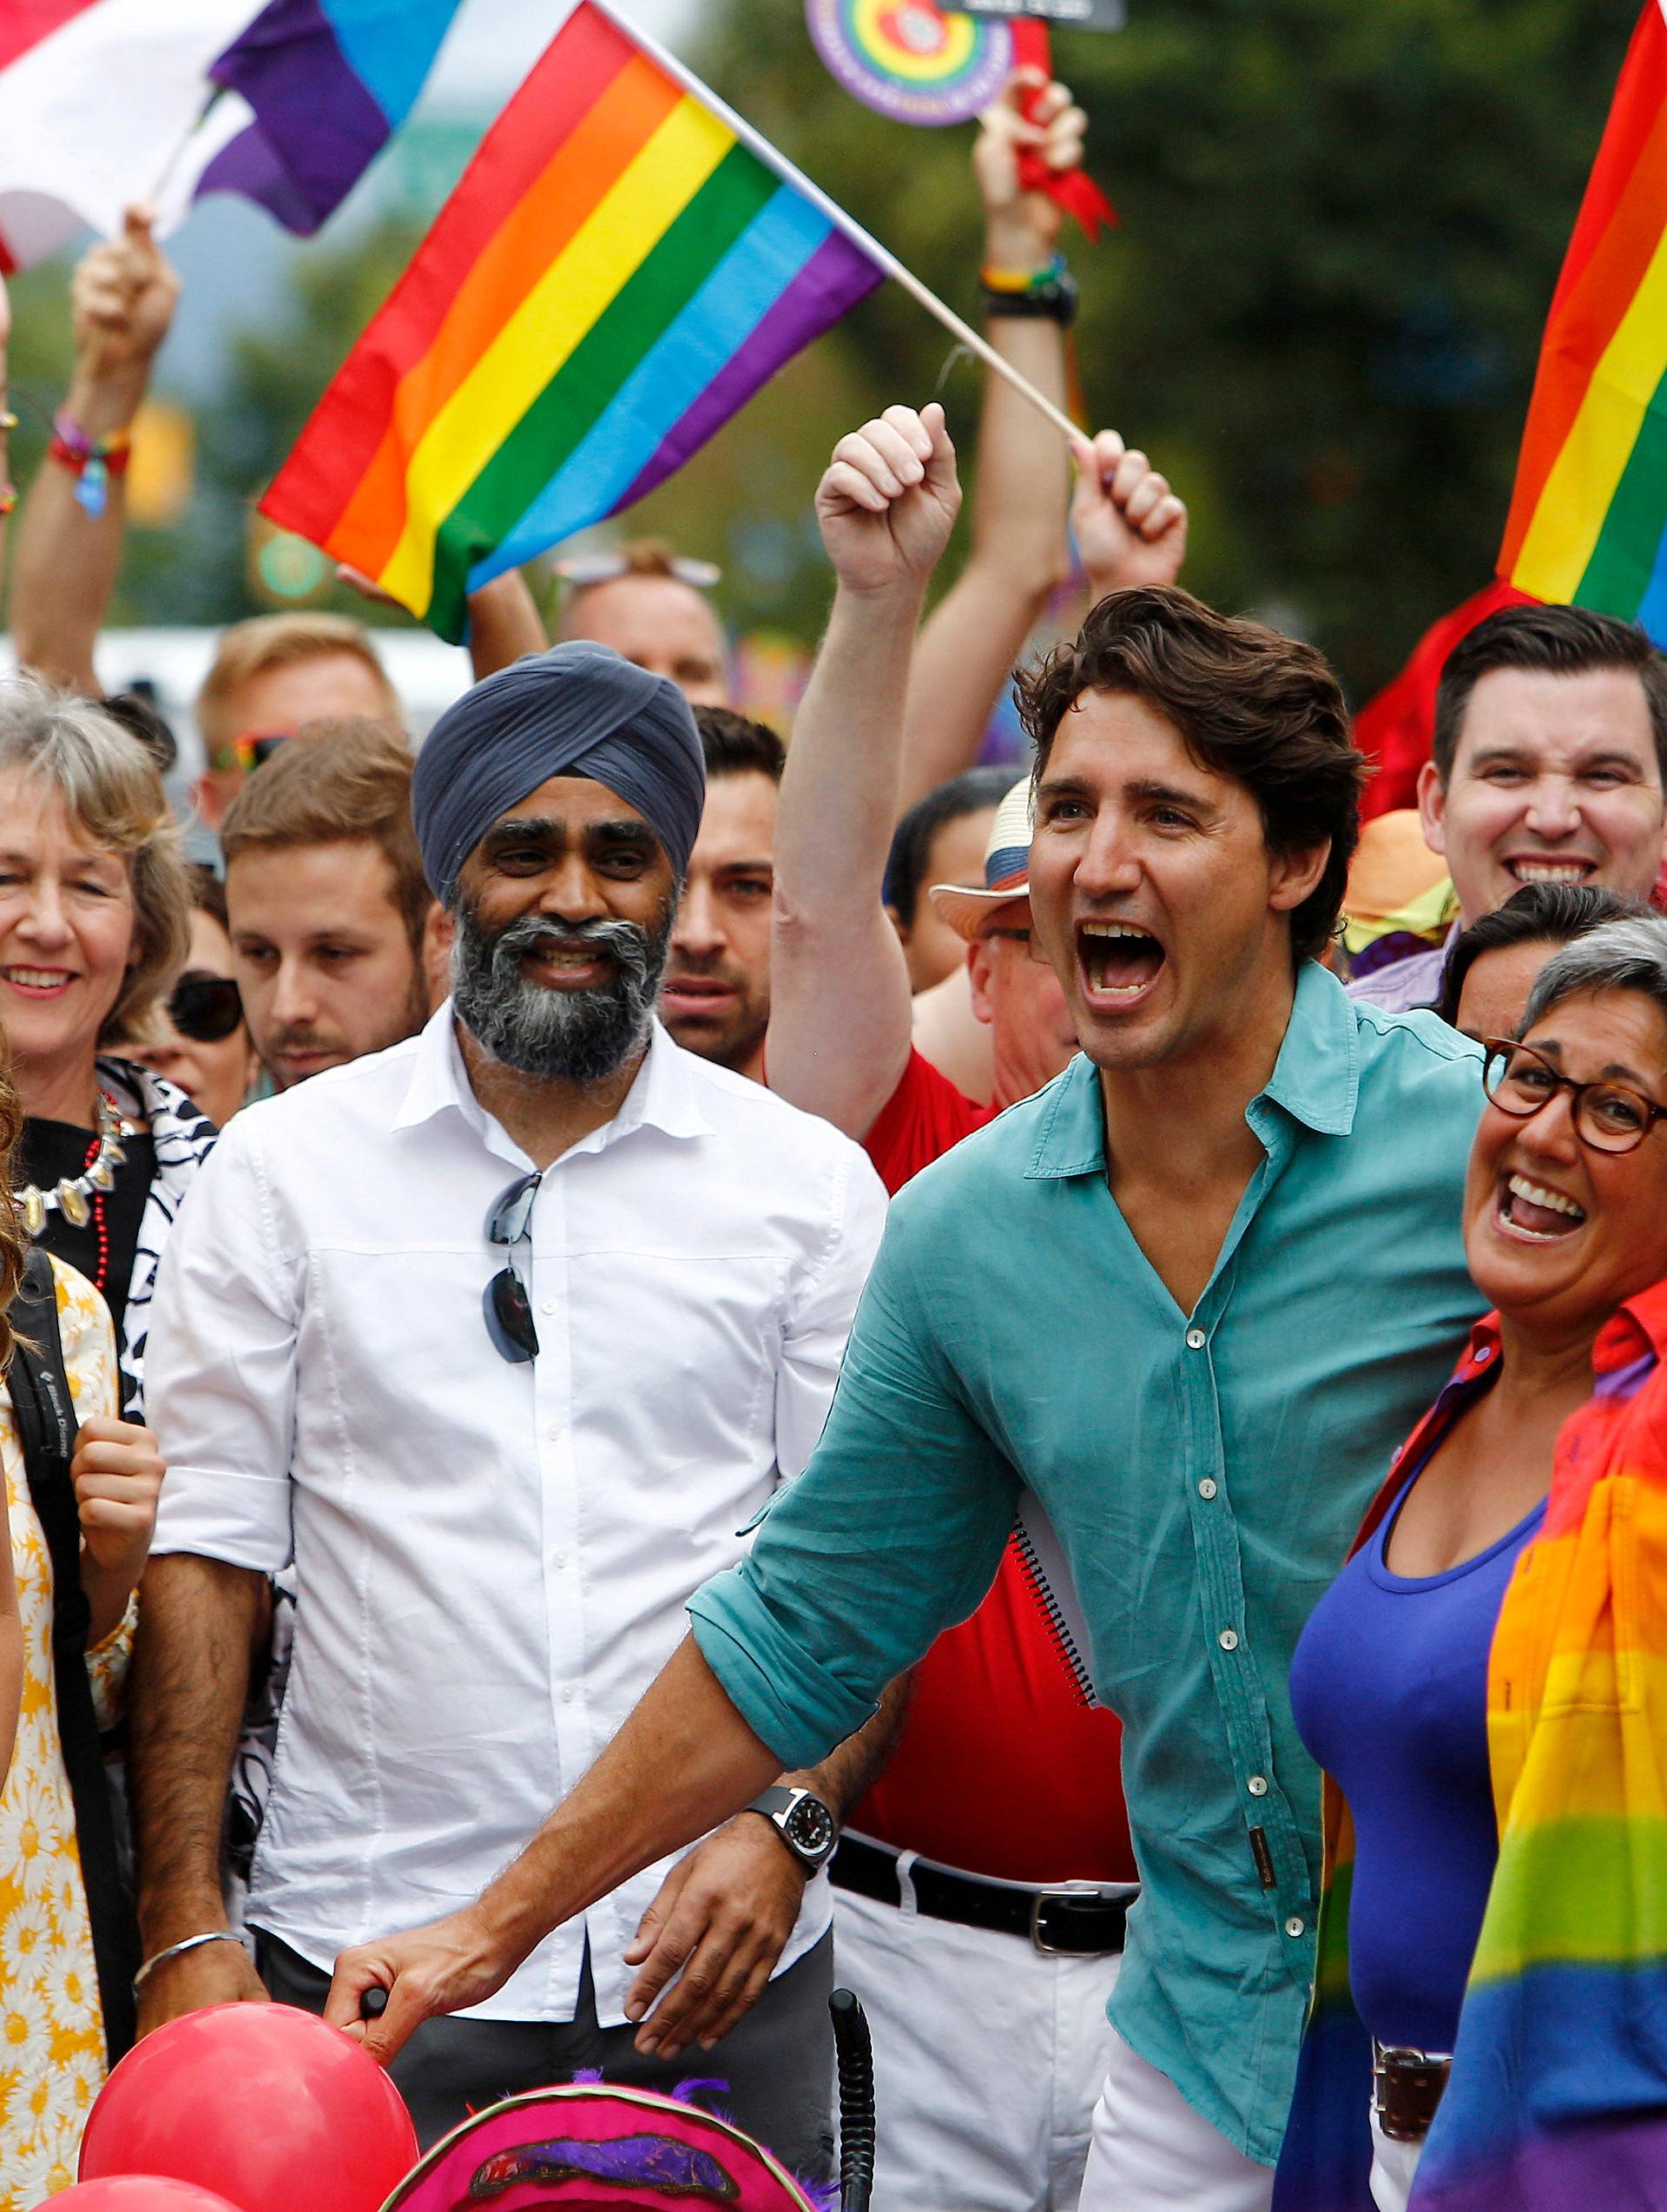 Canada's Prime Minister Justin Trudeau reacts as he and his wife Sophie GrÃ©goire Trudeau (L) walk in the Vancouver Pride Parade